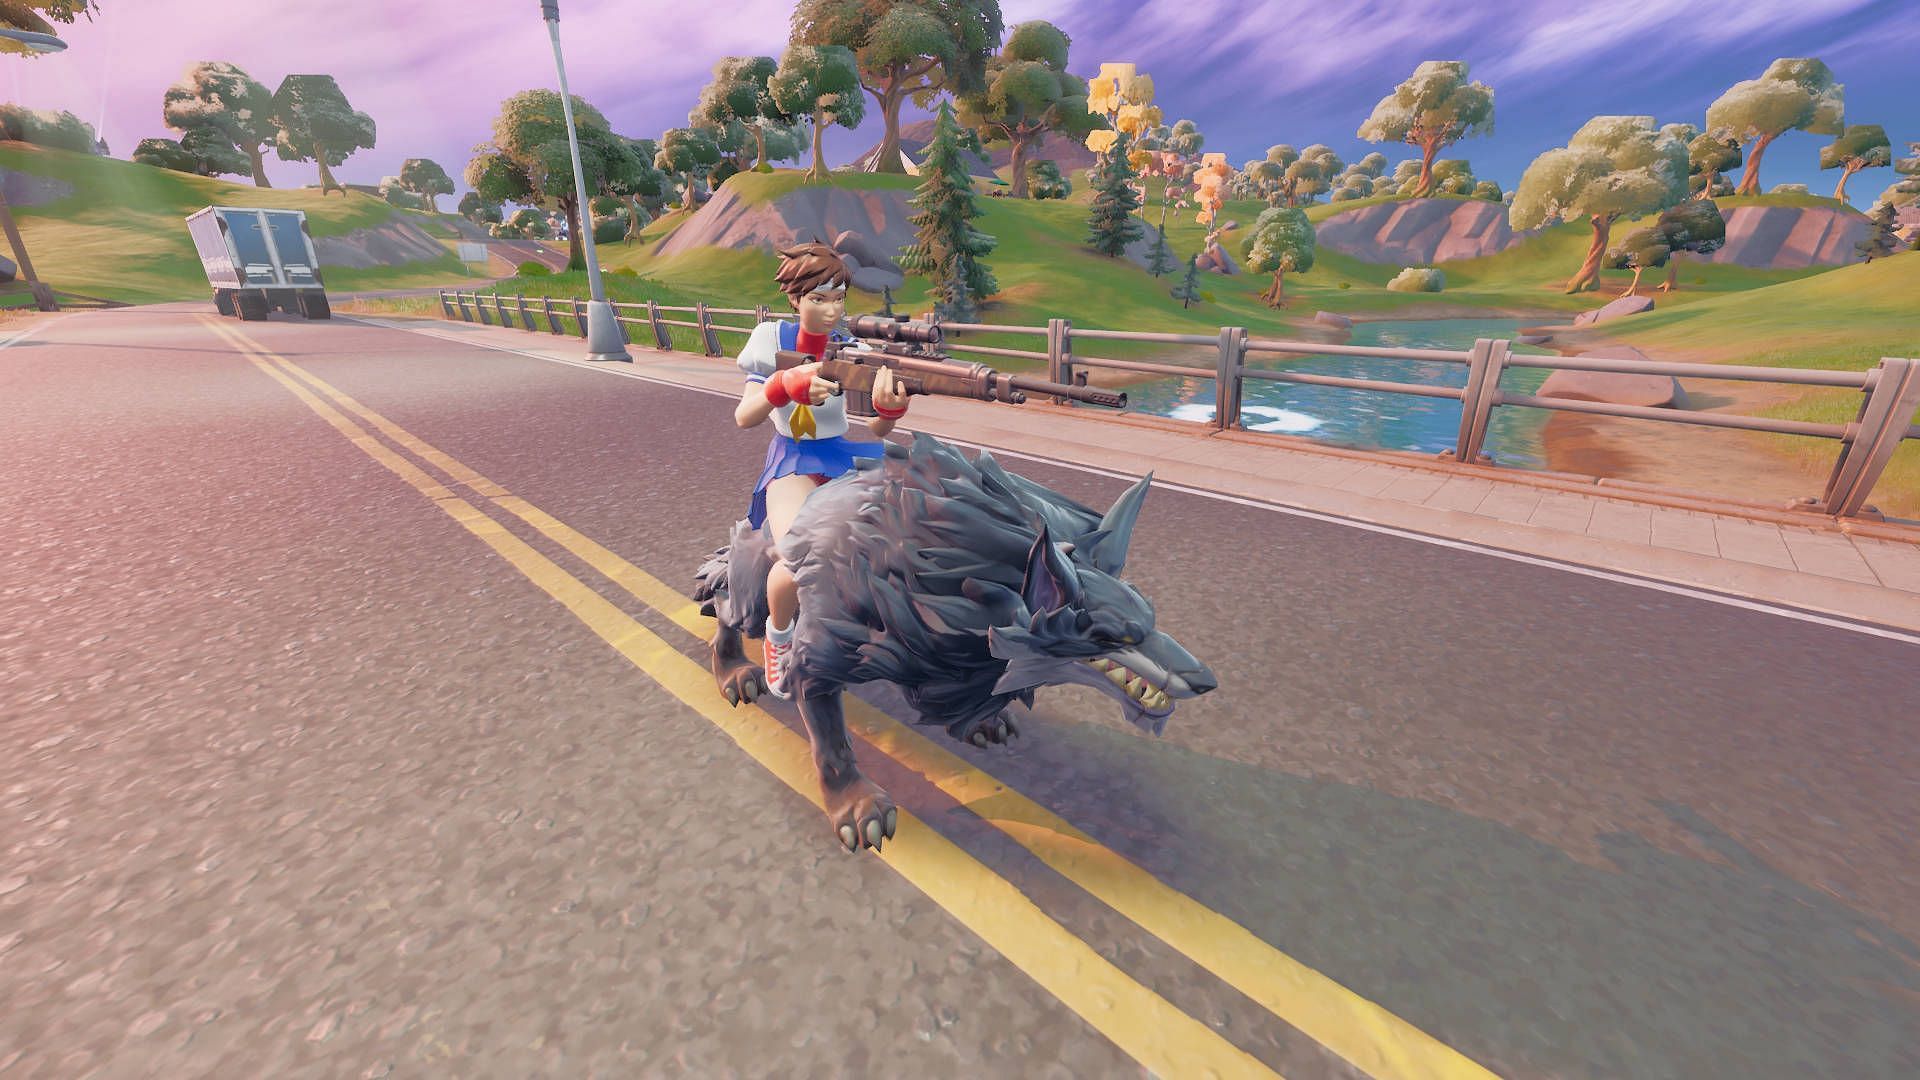 New leak claims that Fortnite players will soon be able to ride flying animals (Image via Epic Games)